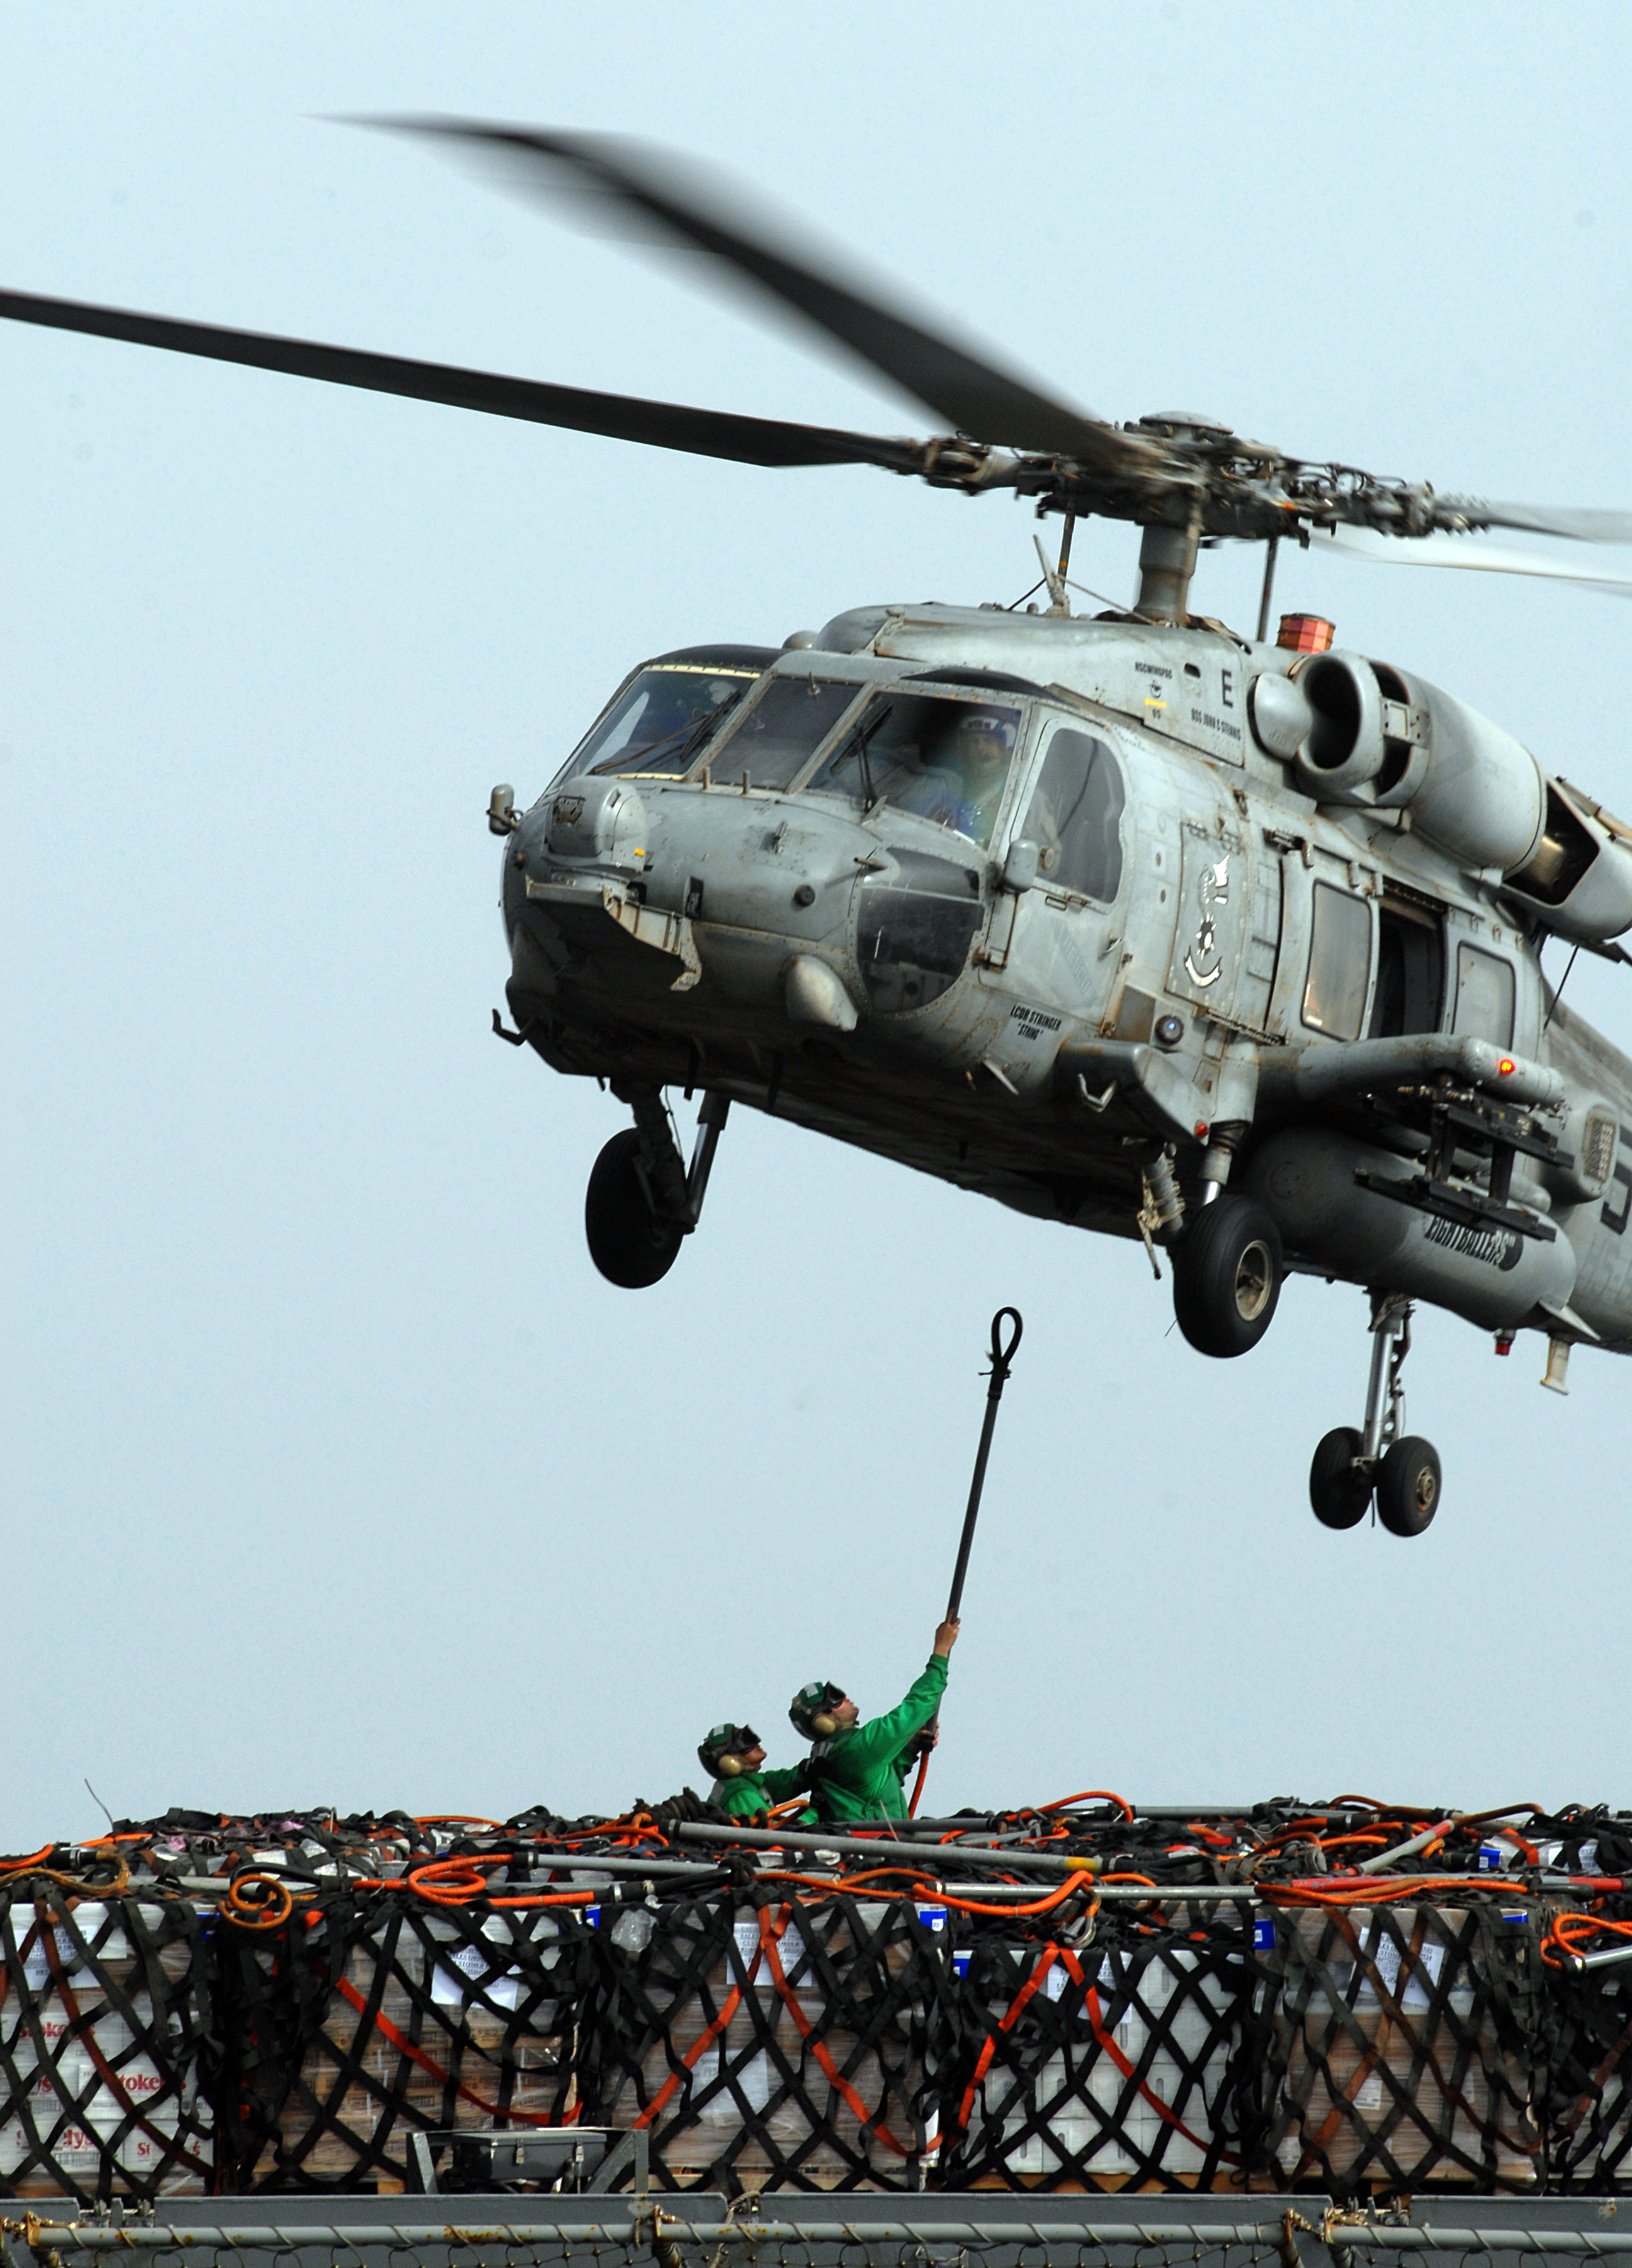 US Navy 070616-N-3038W-183 Sailors from Military Sealift Command fast combat support ship USNS Bridge (T-AOE 10) attach cargo nets holding pallets of supplies to an HH-60H Seahawk during a vertical replenishment